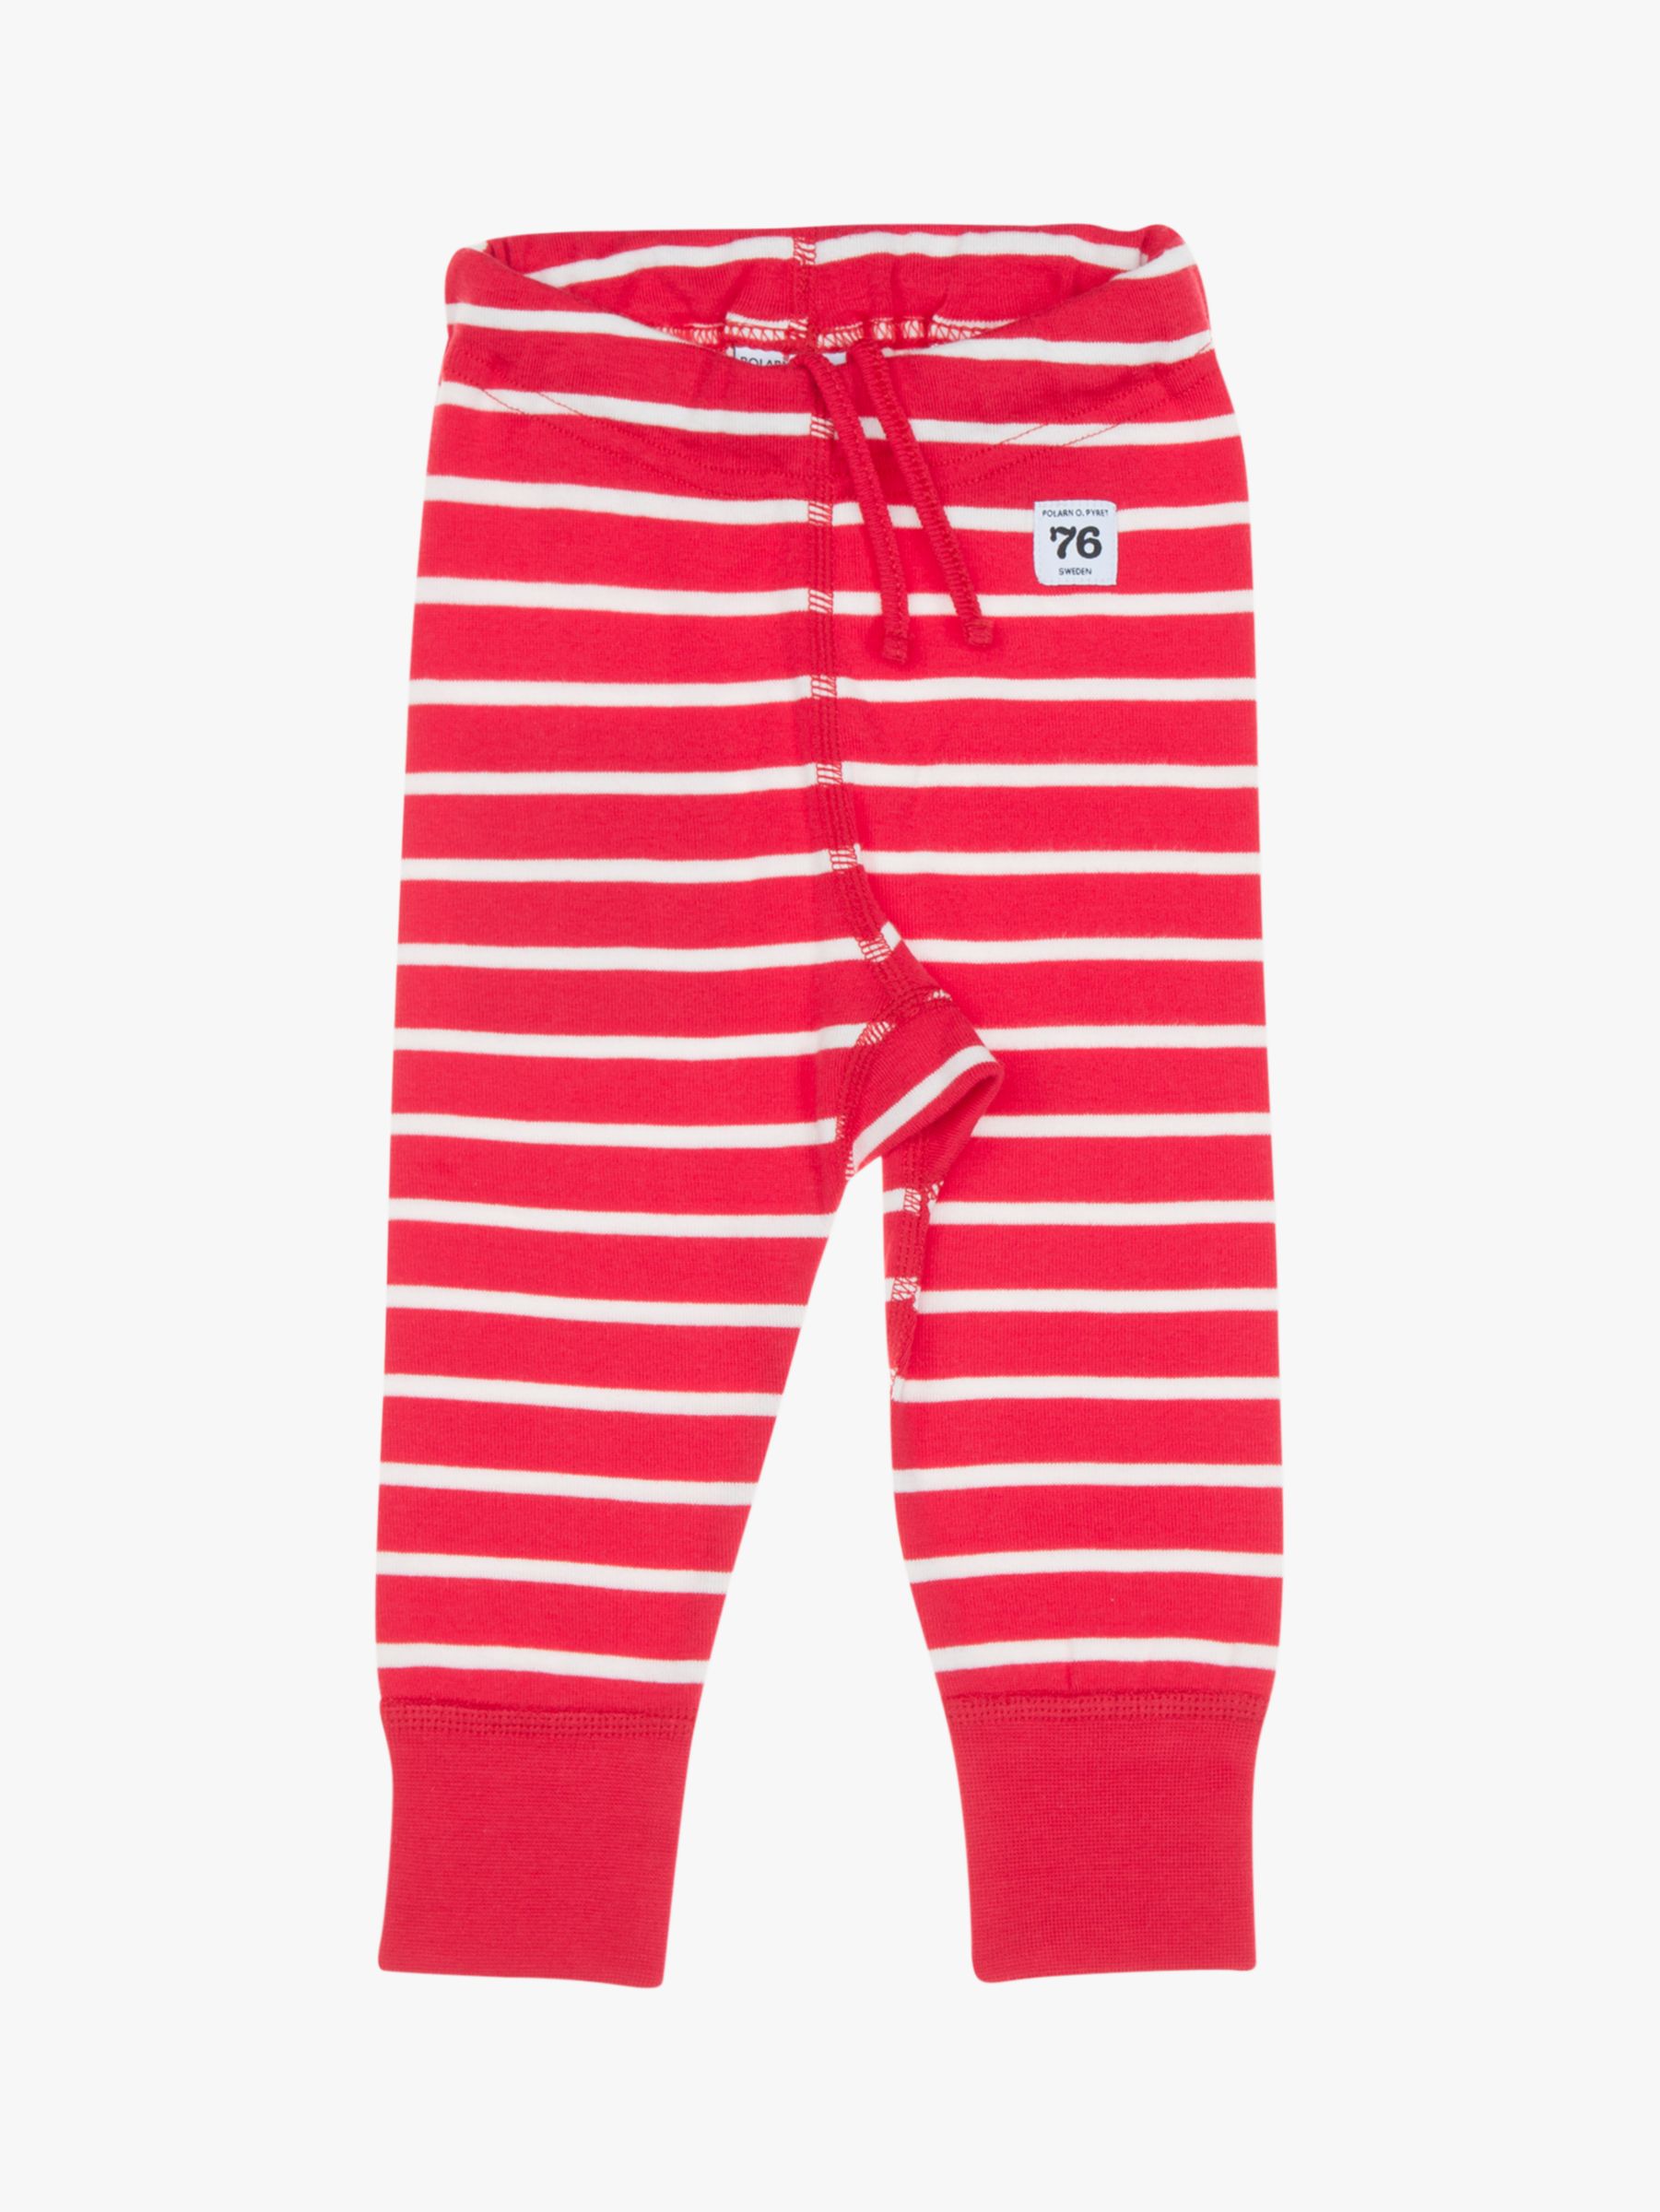 Polarn O. Pyret Baby GOTS Organic Cotton Stripe Leggings, Red, Early baby